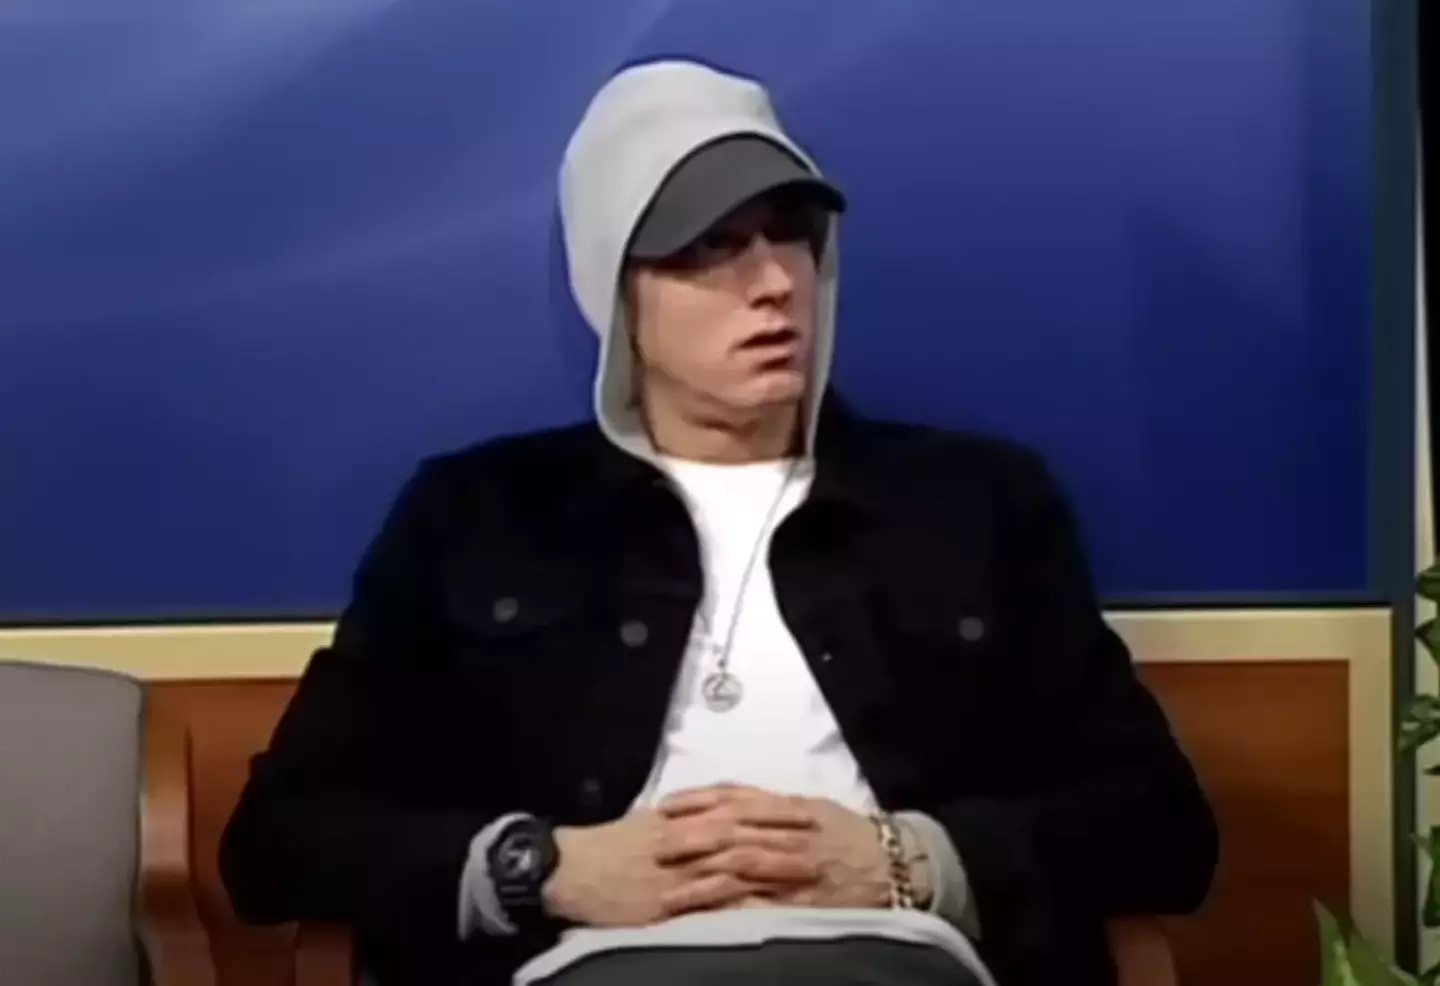 The bizarre comedy skit is possibly Eminem's most awkward interview.